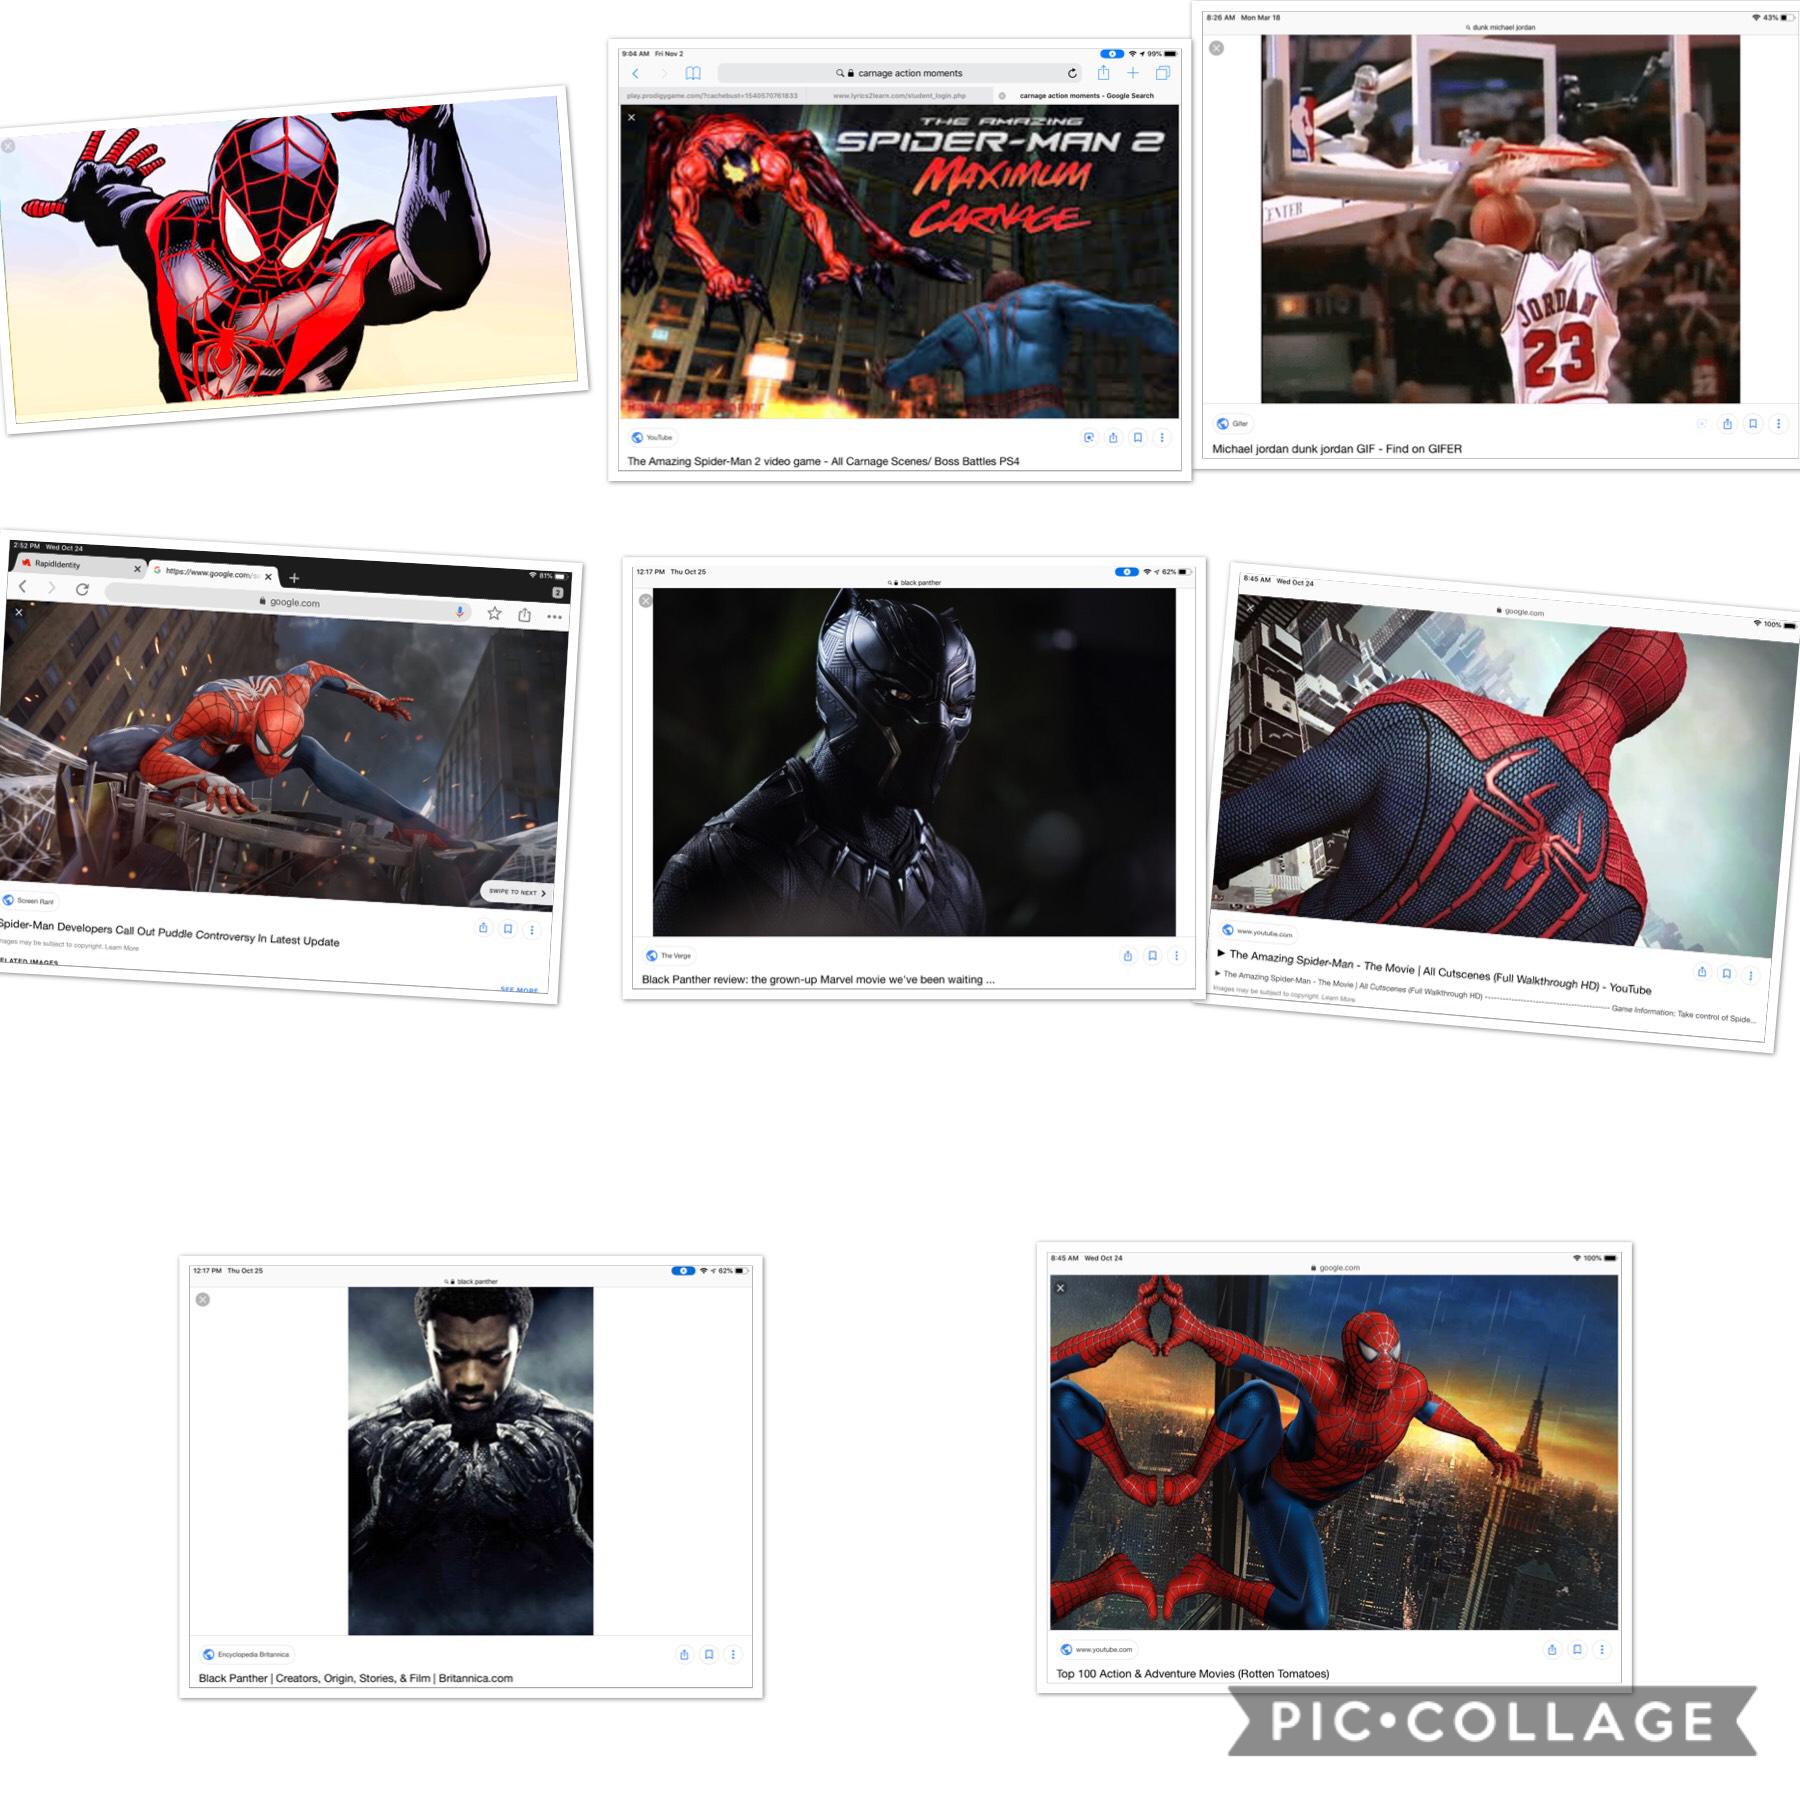 Micheal Jordan might be Spider-Man or black panther?